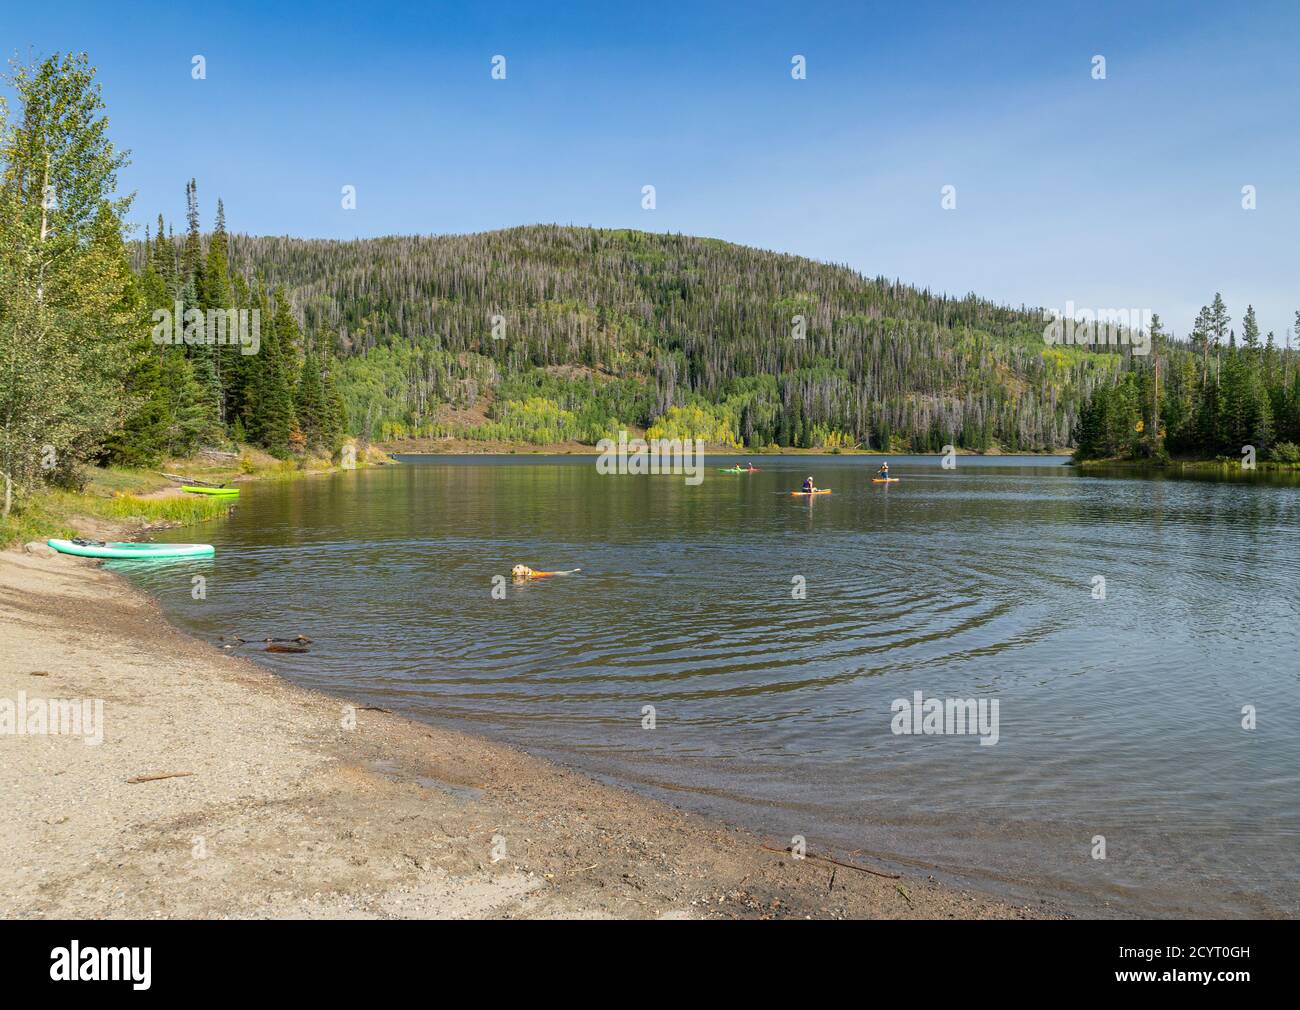 Clark, Colorado/USA - September 14, 2020:  Unidentified people enjoy kayaking and paddleboarding on Pearl Lake on a beautiful autumn day Stock Photo